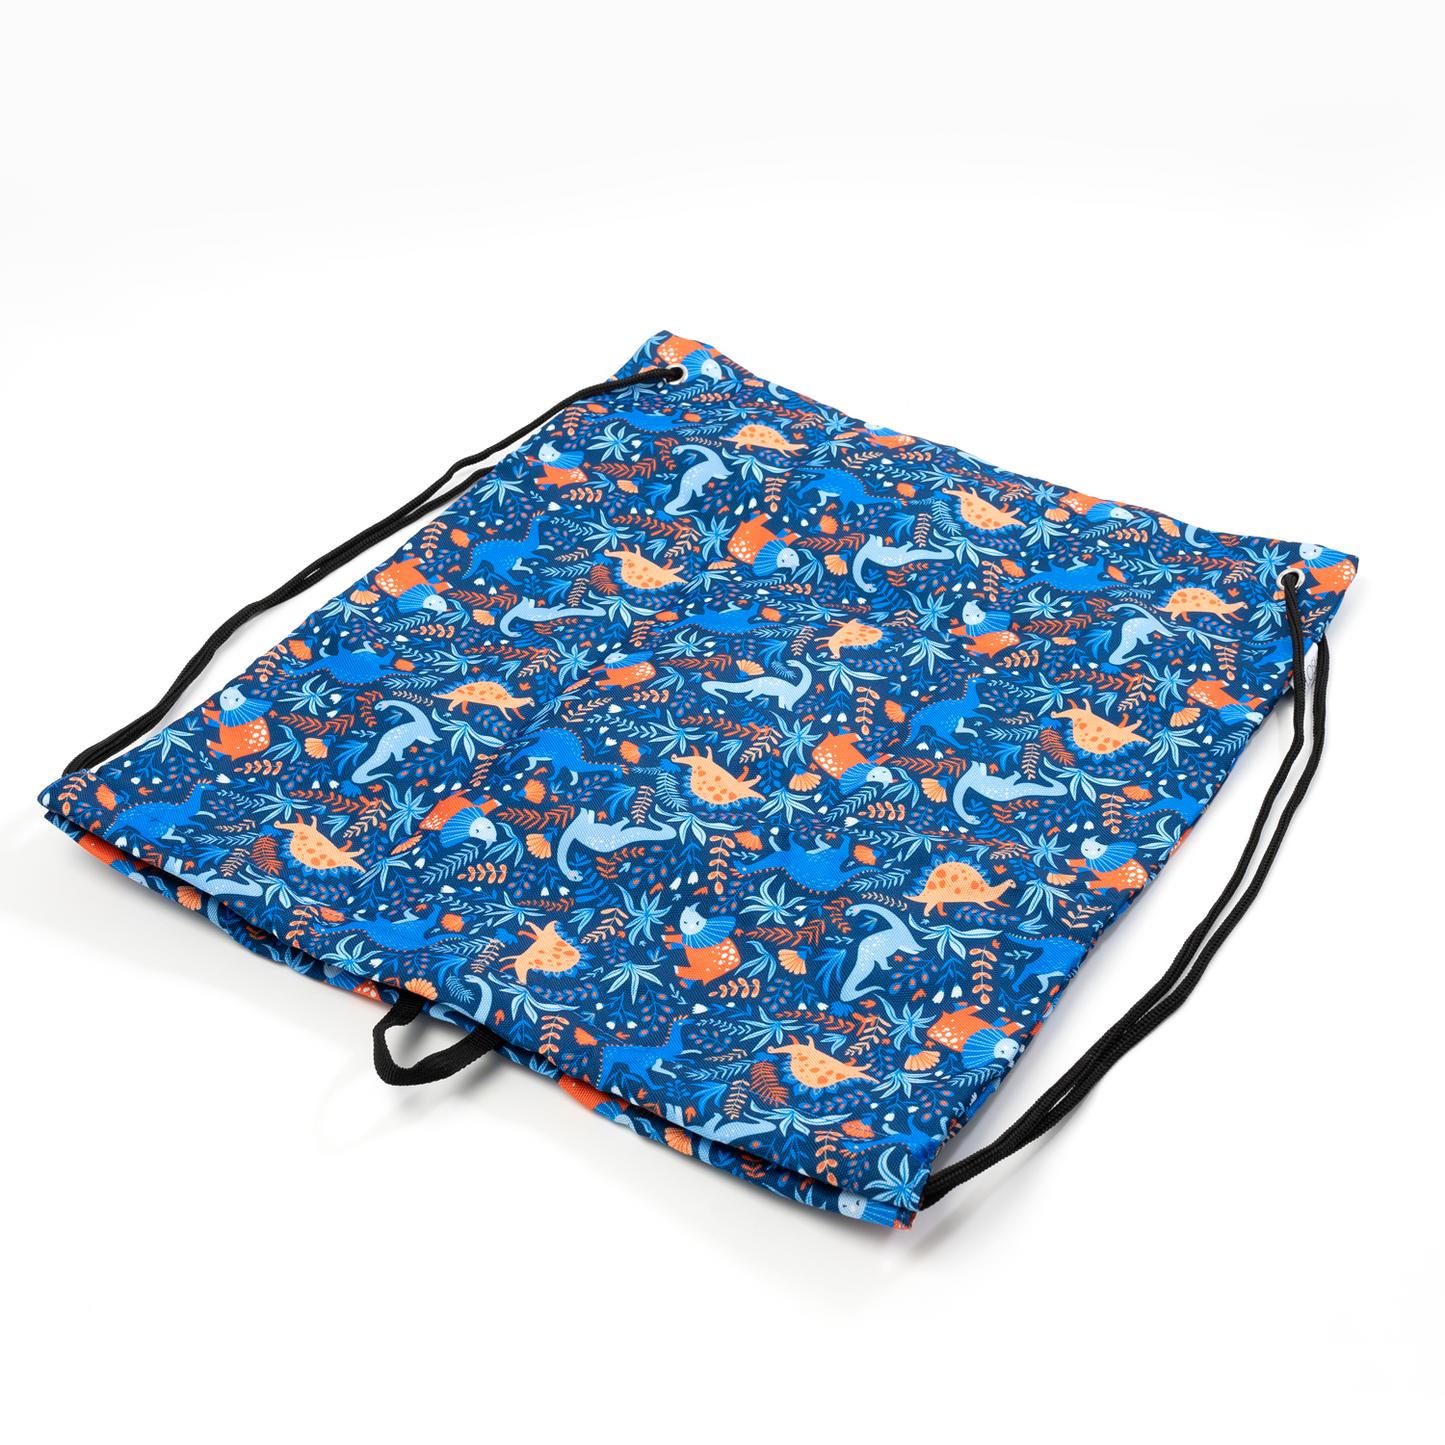 Out & About Dinosaur Drawstring Bag